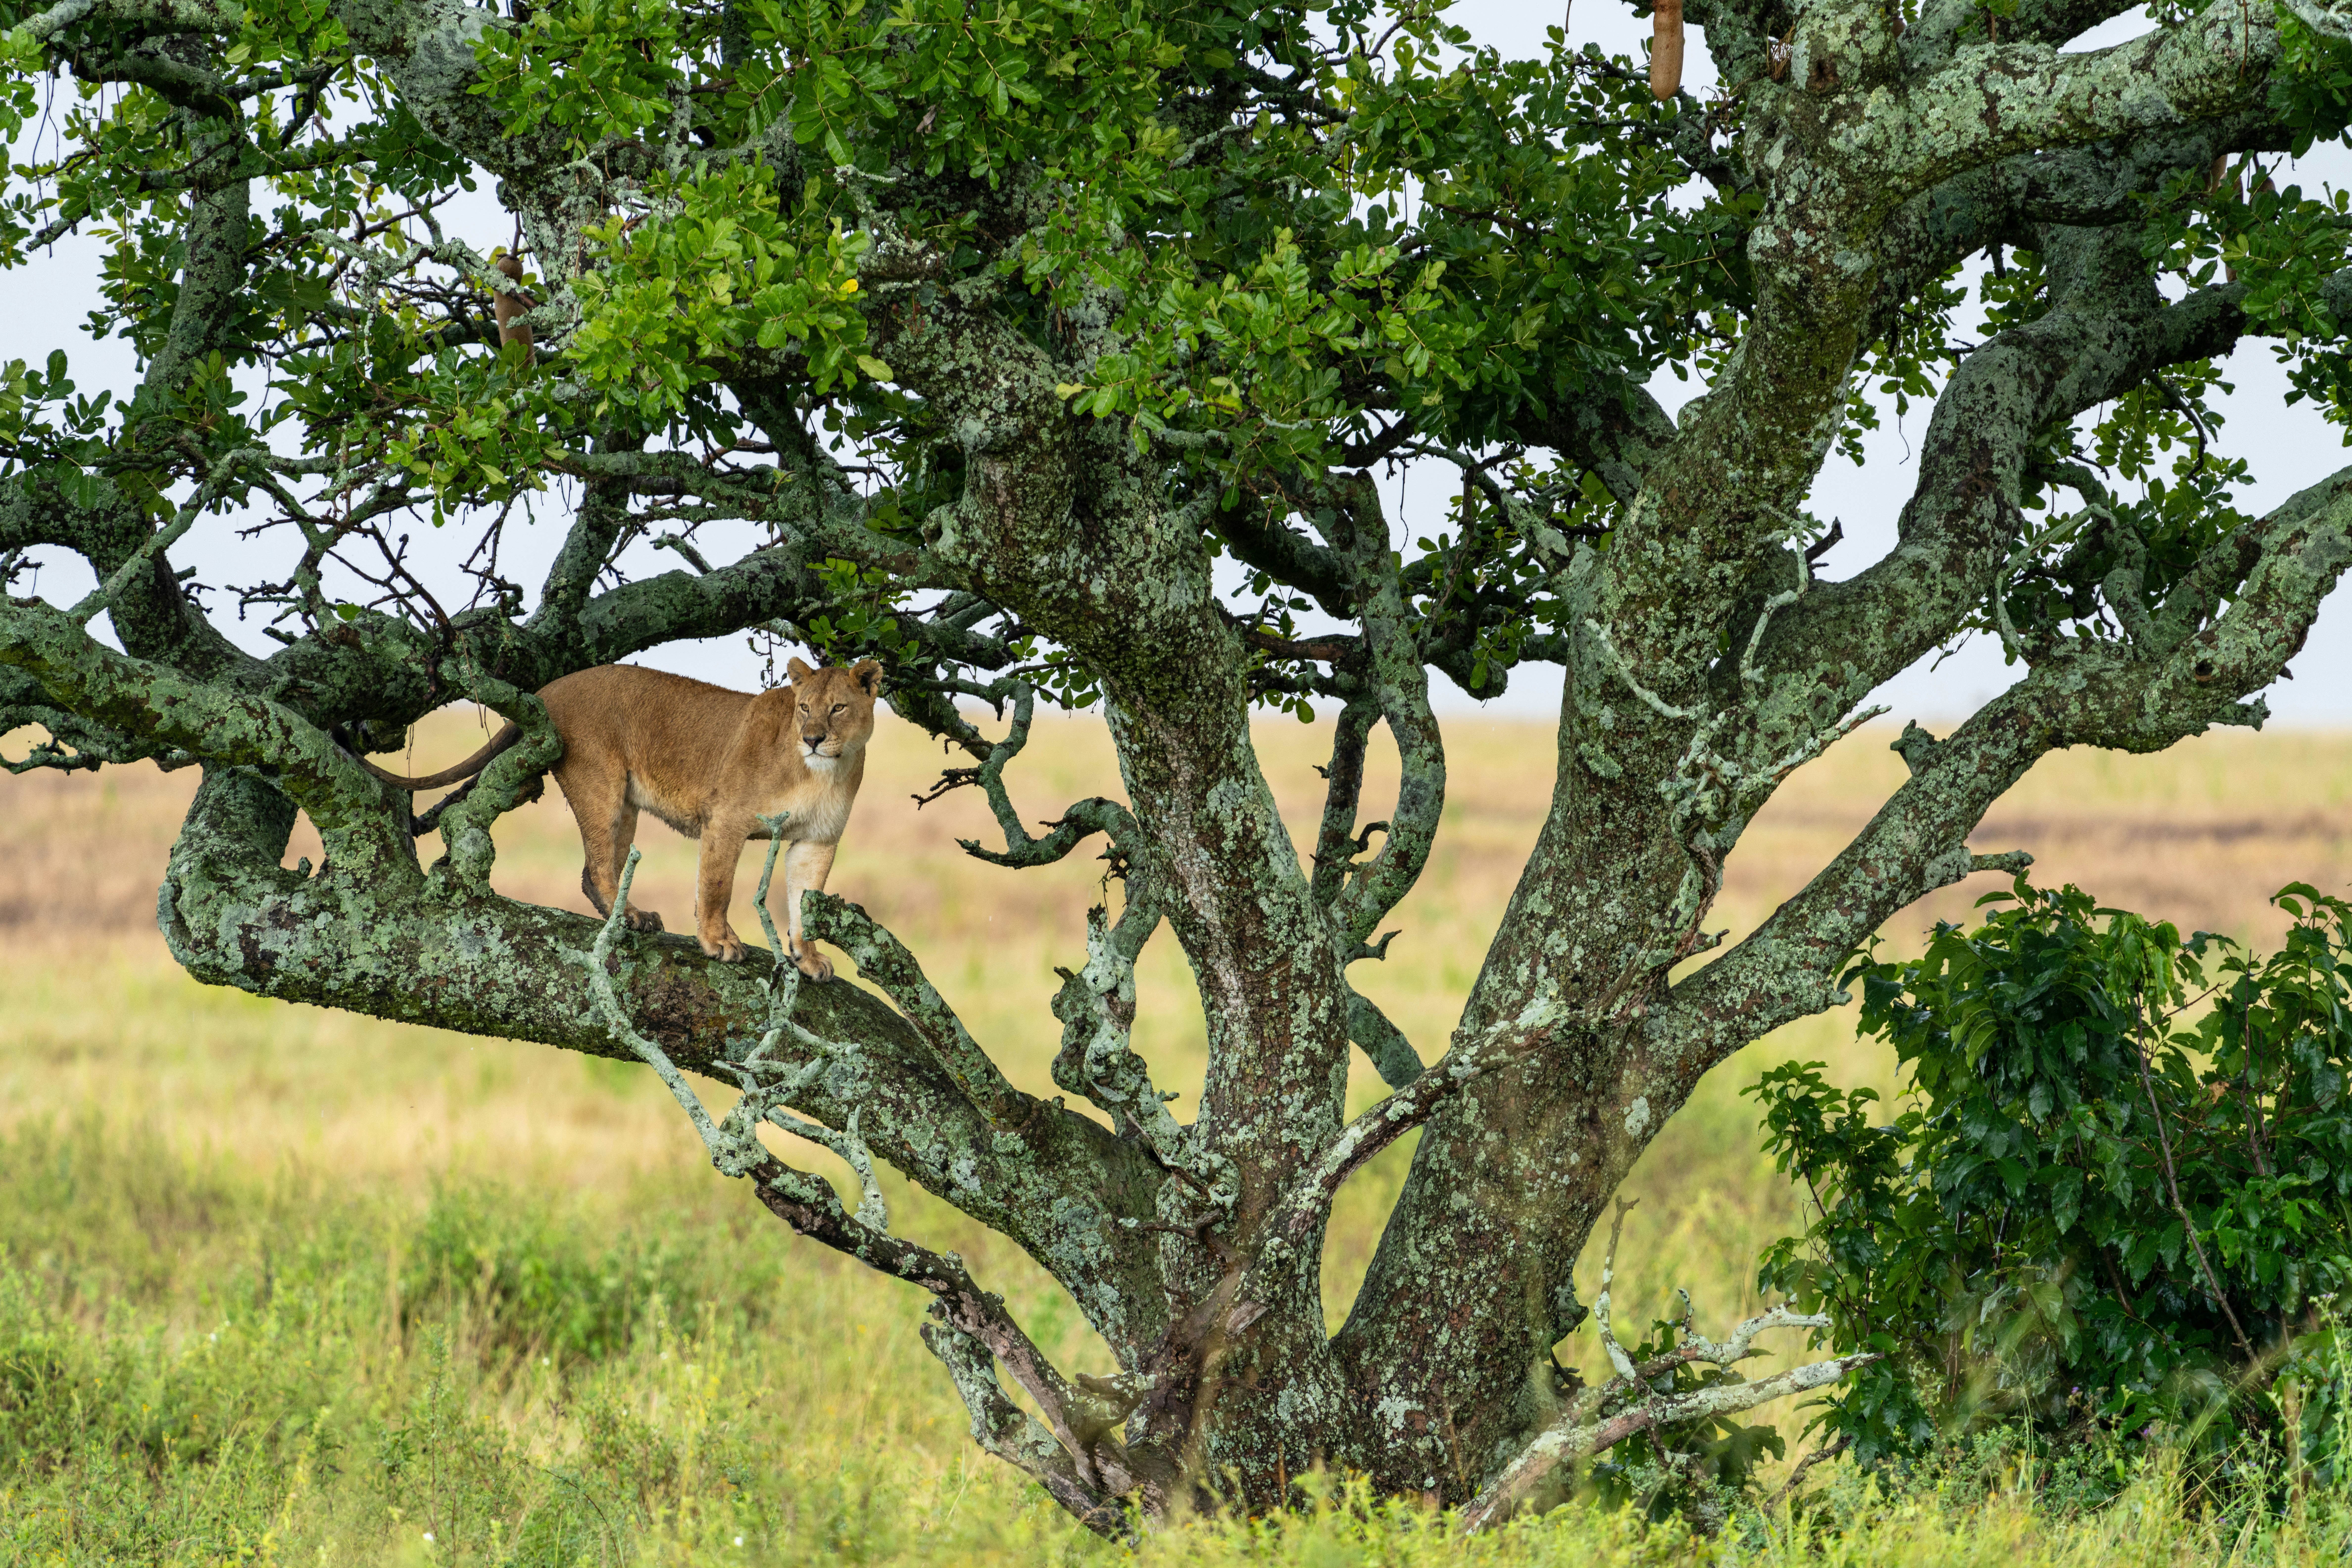 great photo recipe,how to photograph a tree lioness.